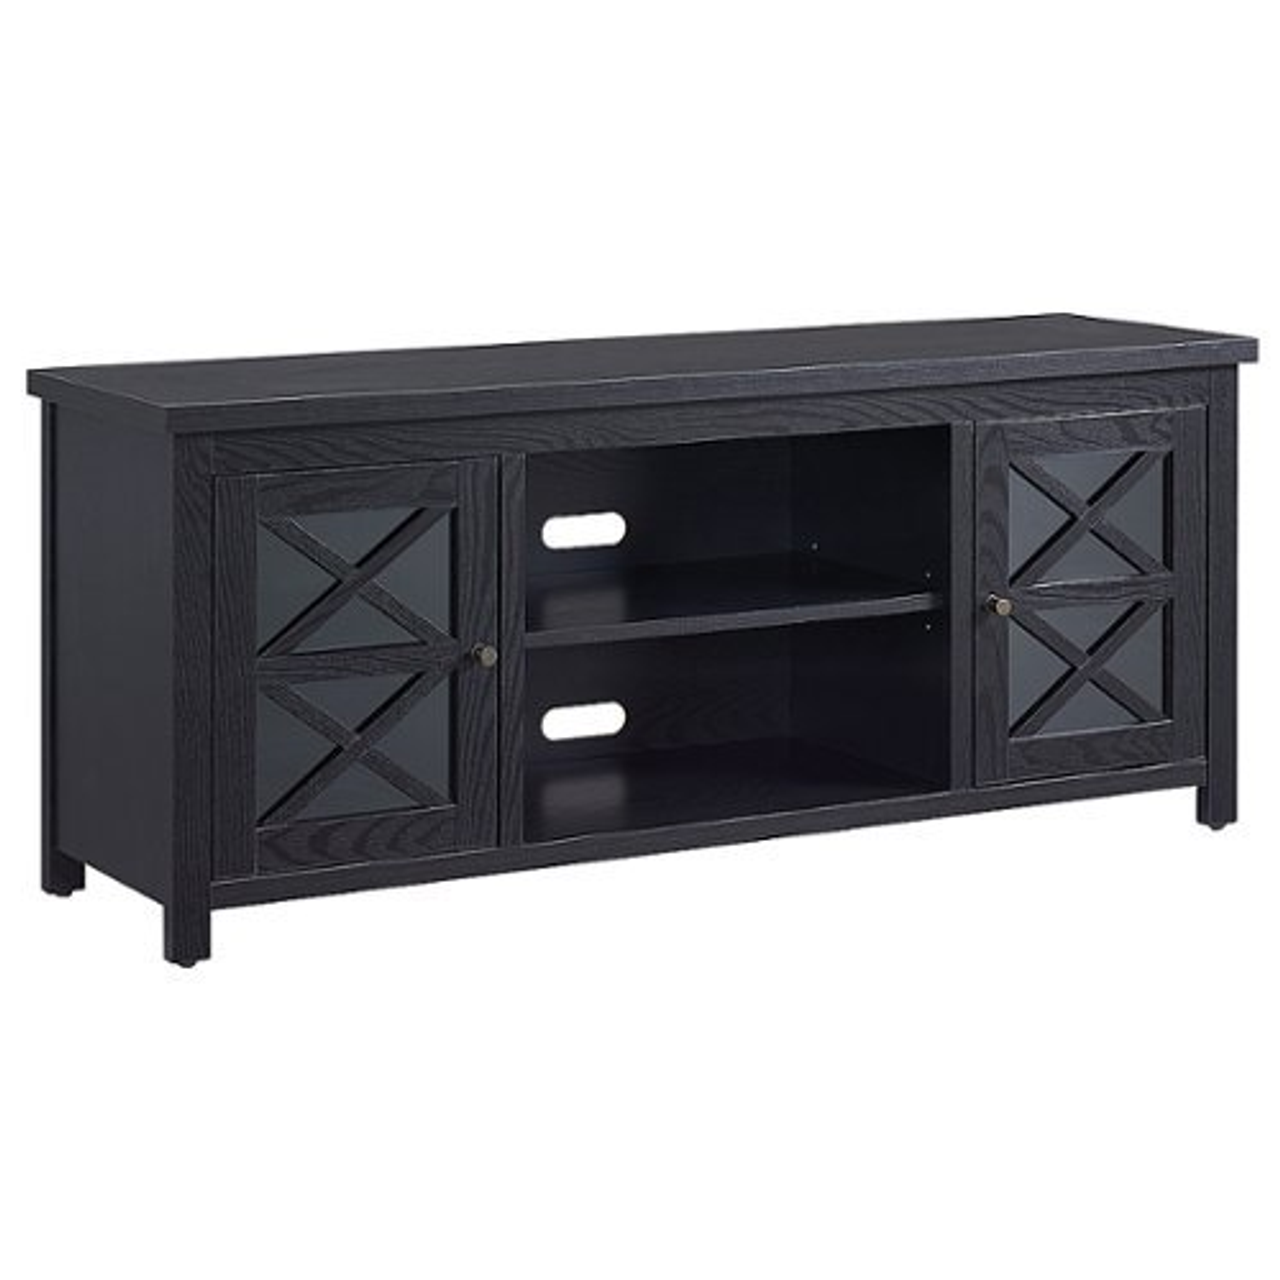 Camden&Wells - Colton TV Stand for TVs up to 65" - Black Grain